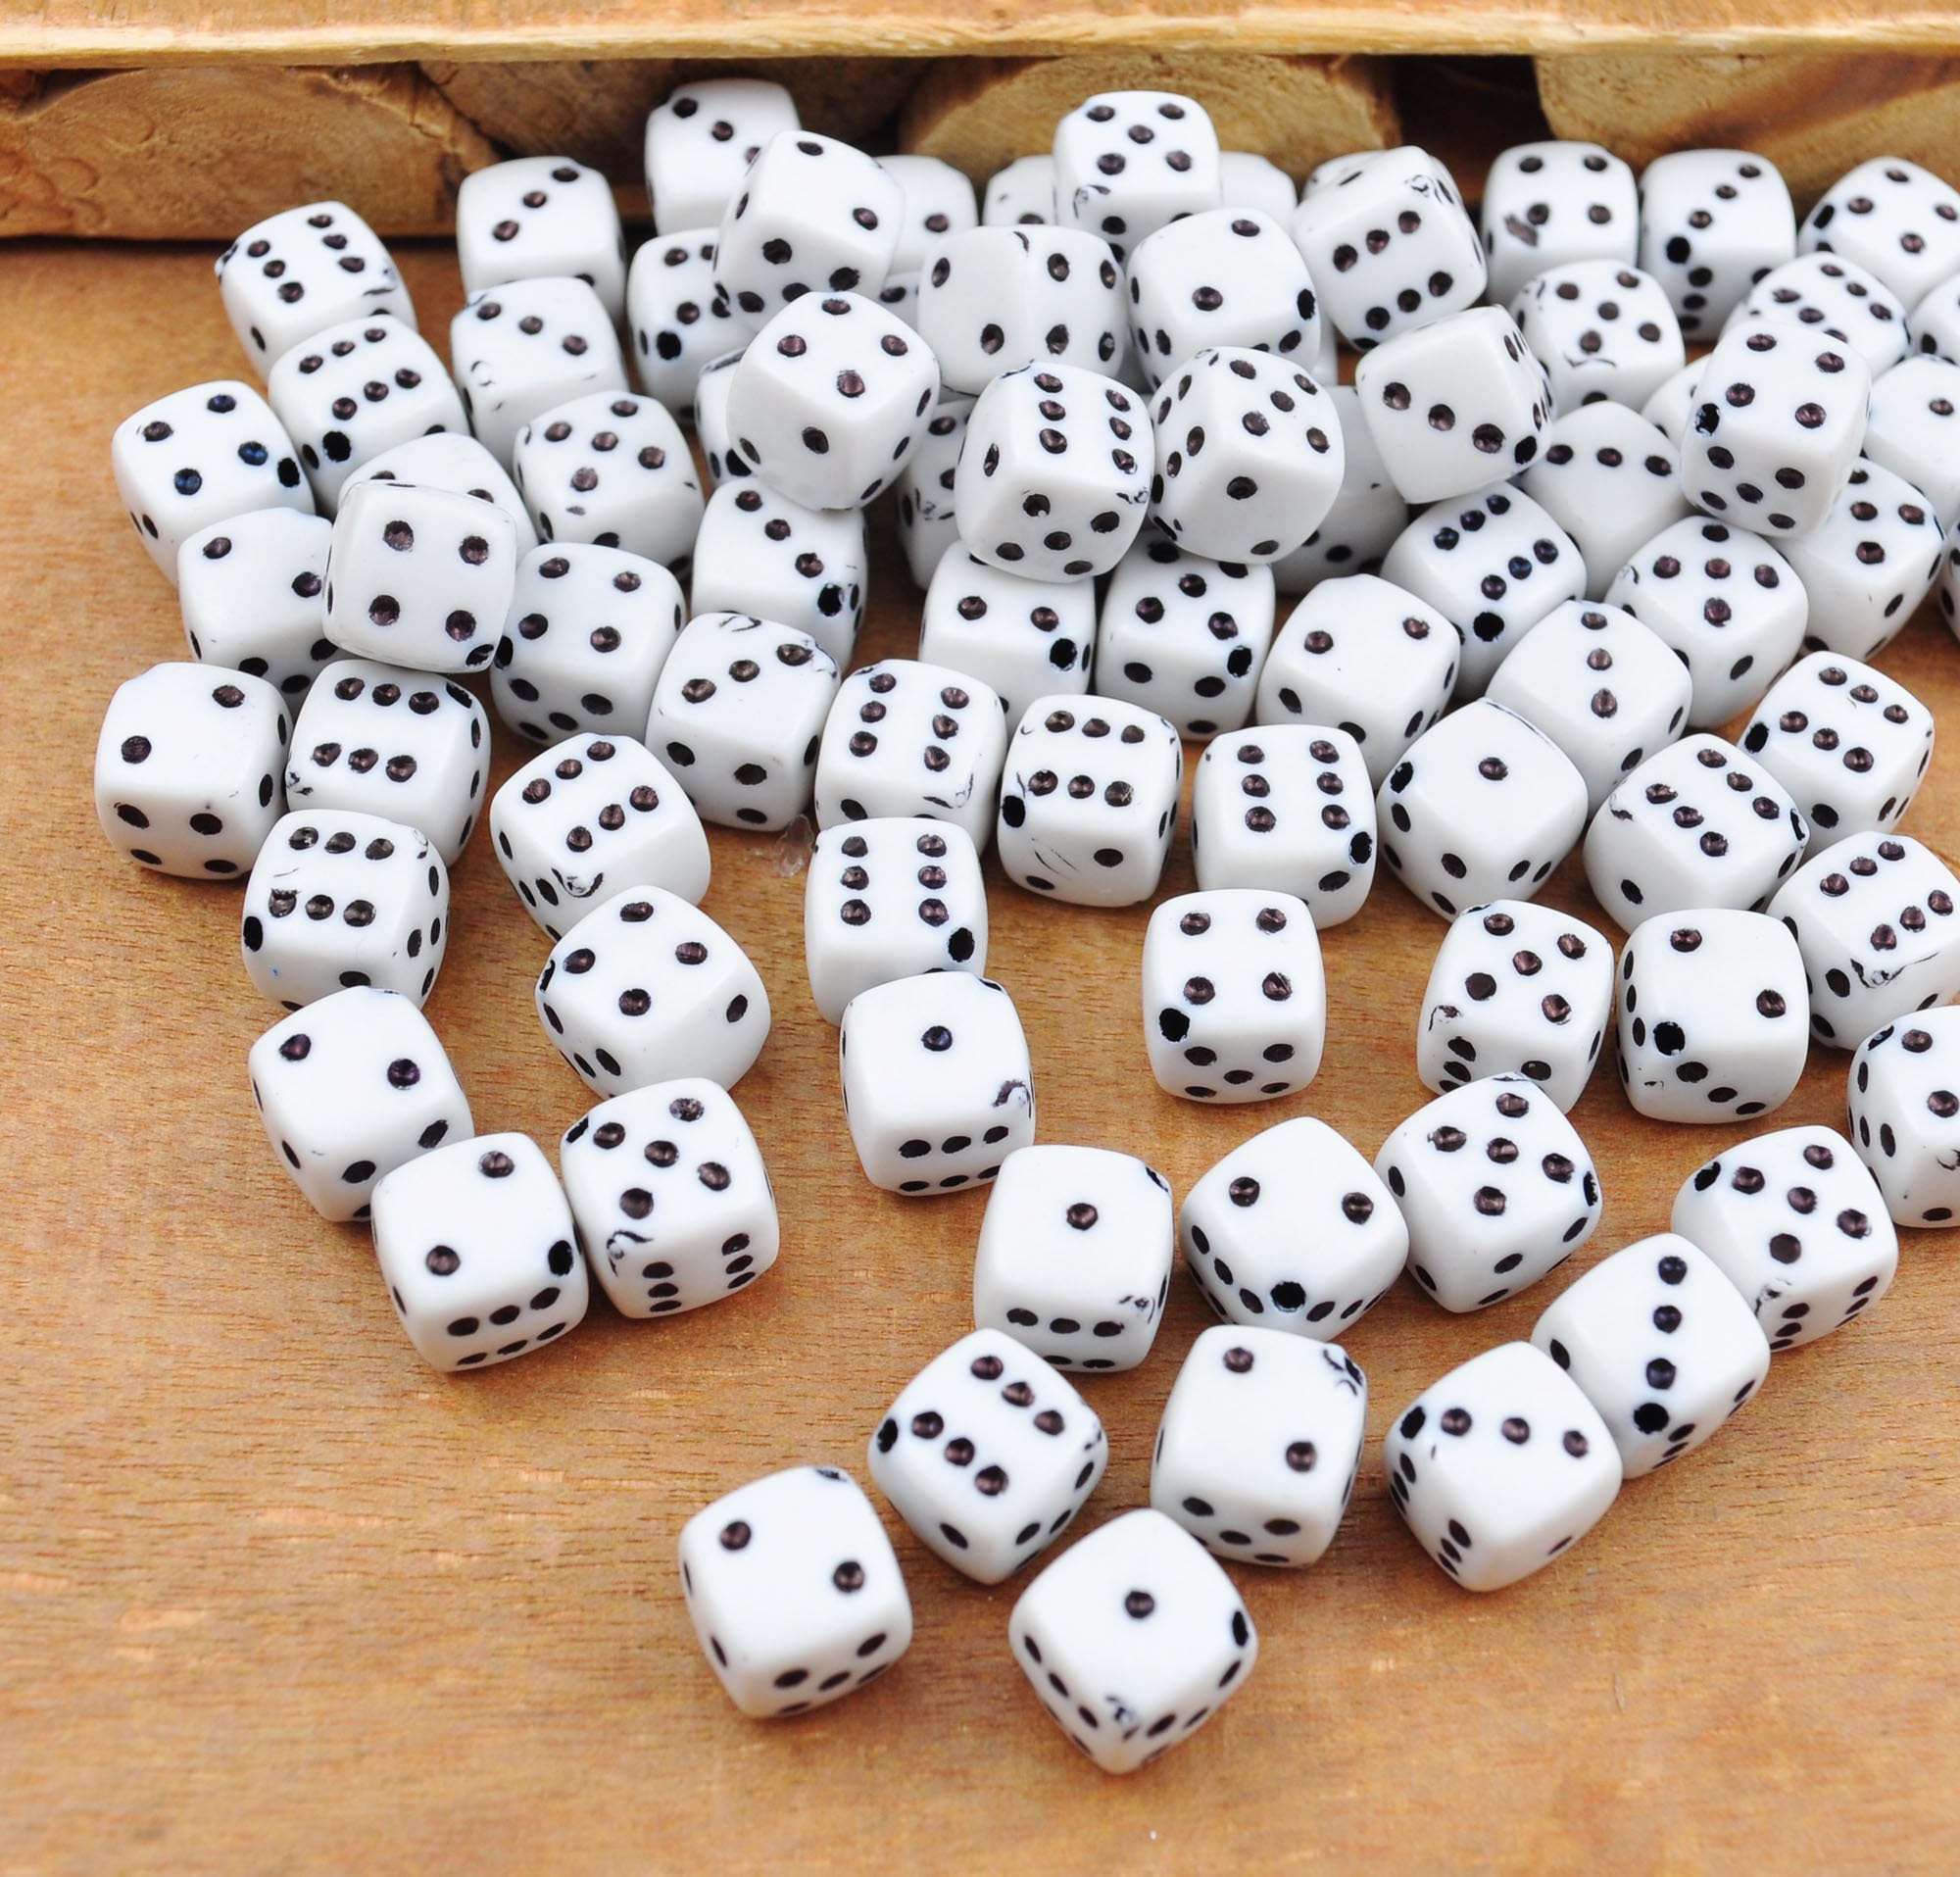 50-100Pcs 8mm Black Dice Beads Small / Rounded Corners